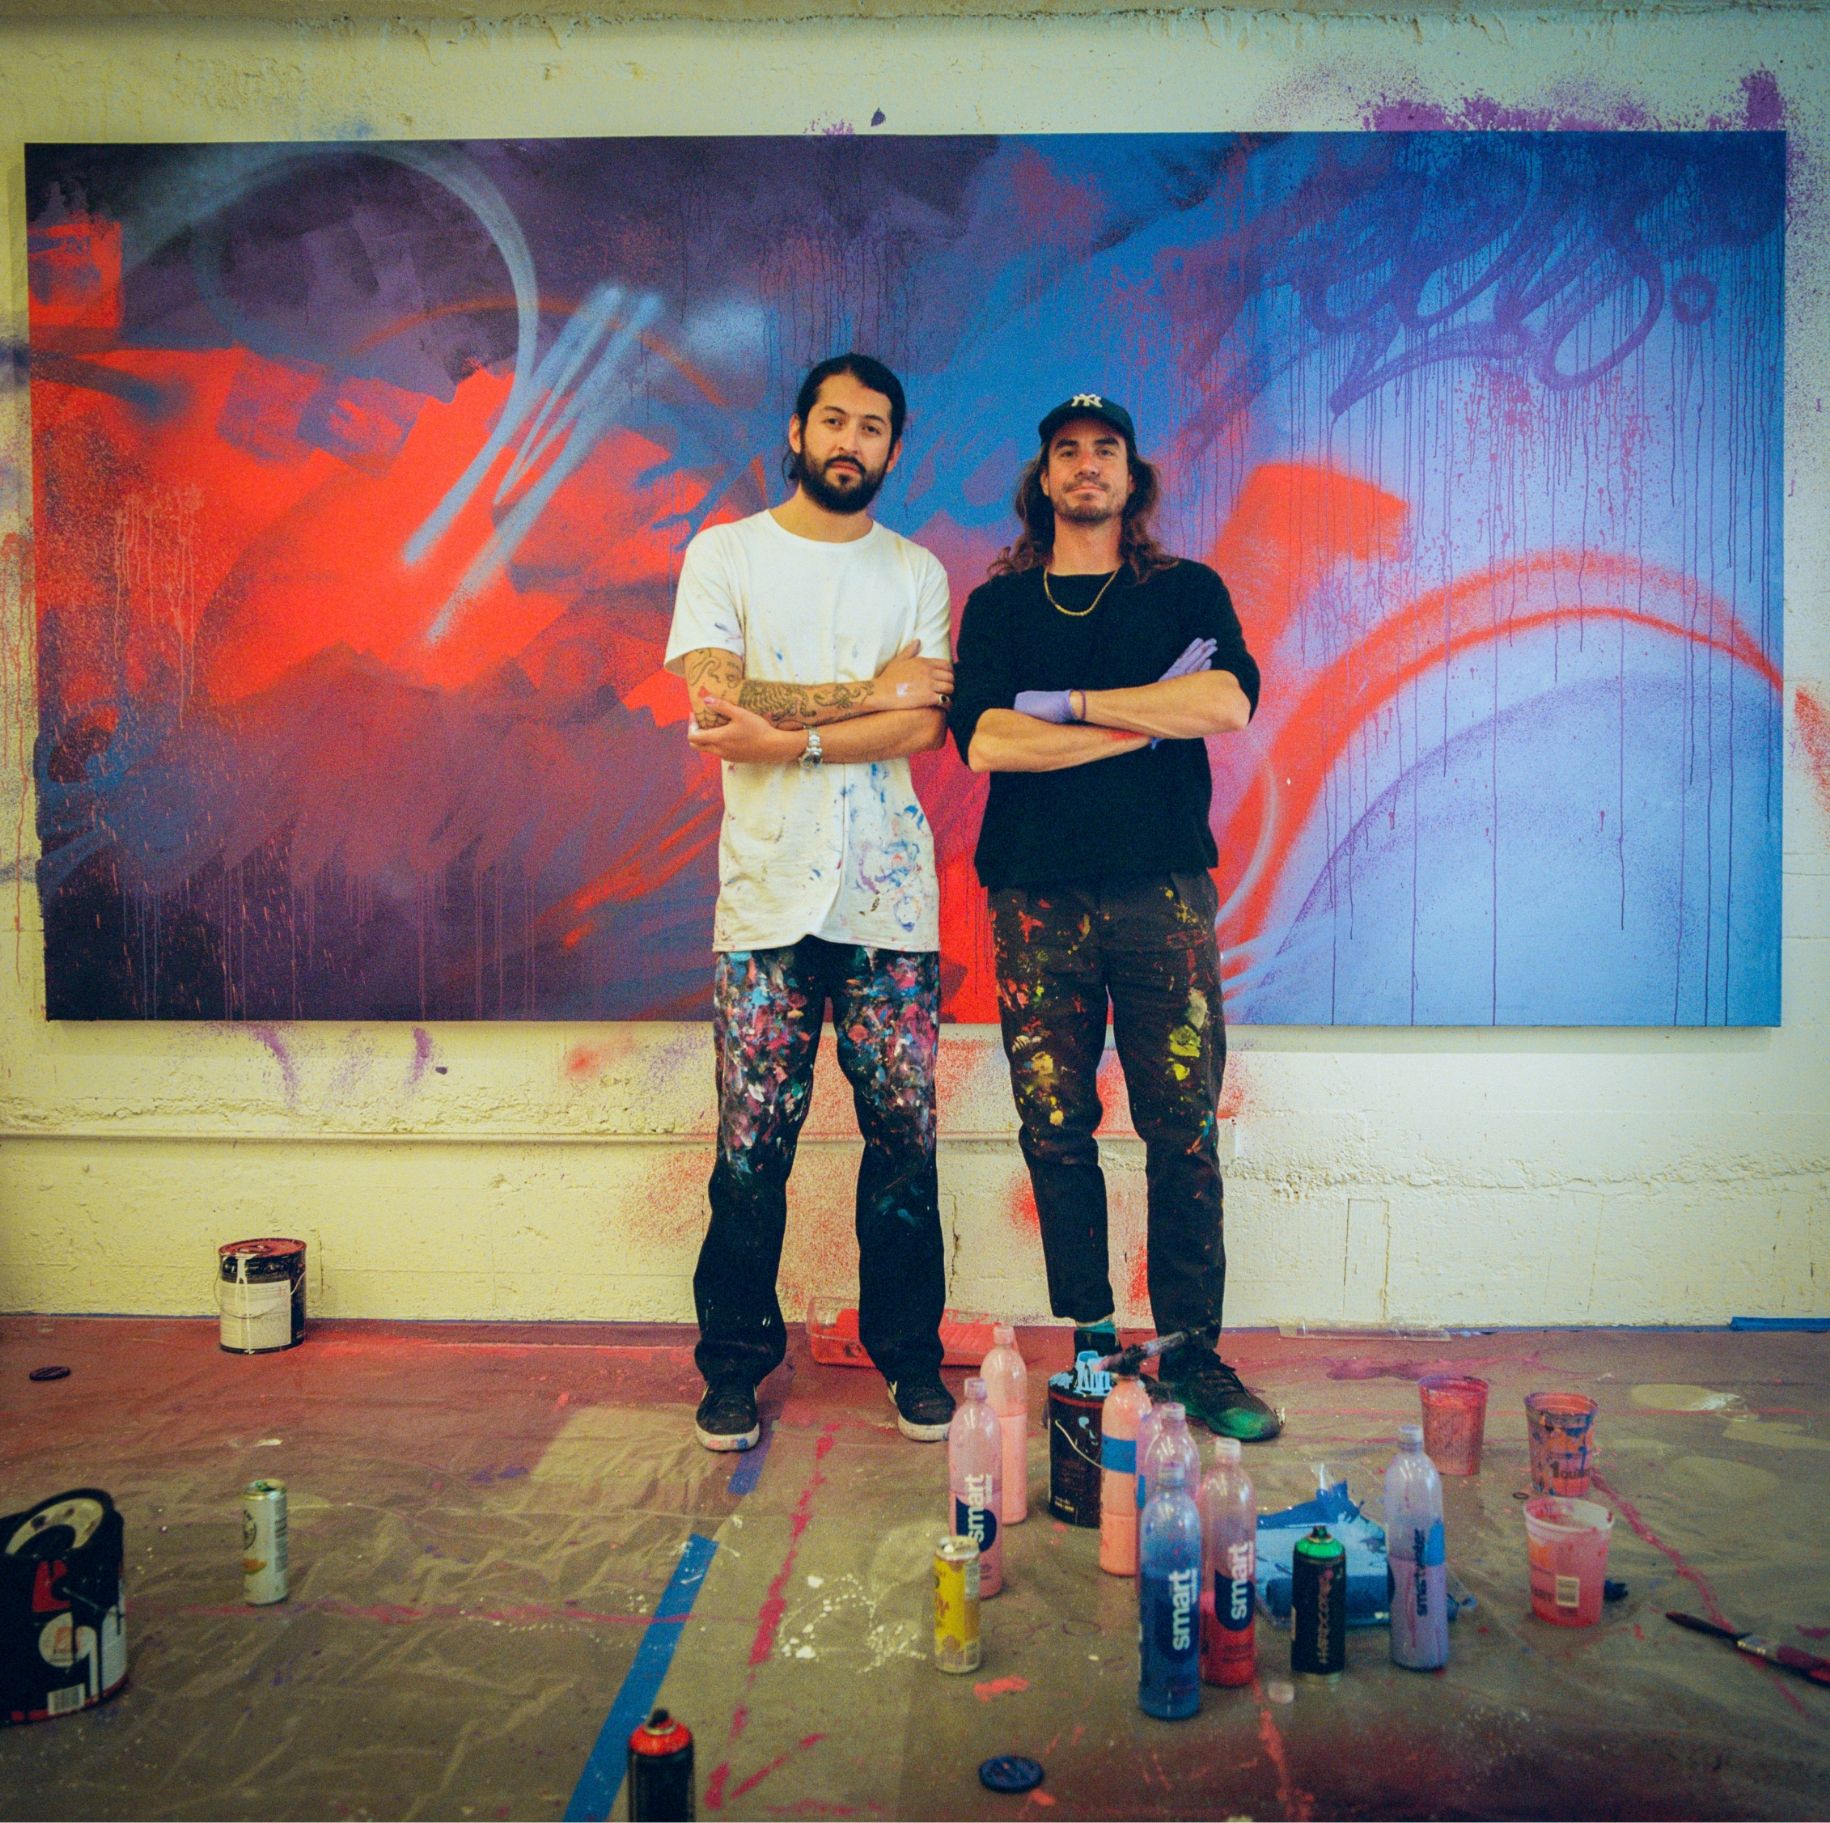 Madsteez and Its a Living stand in front of finished large painting. Paint supplies and drop cloths cover floor